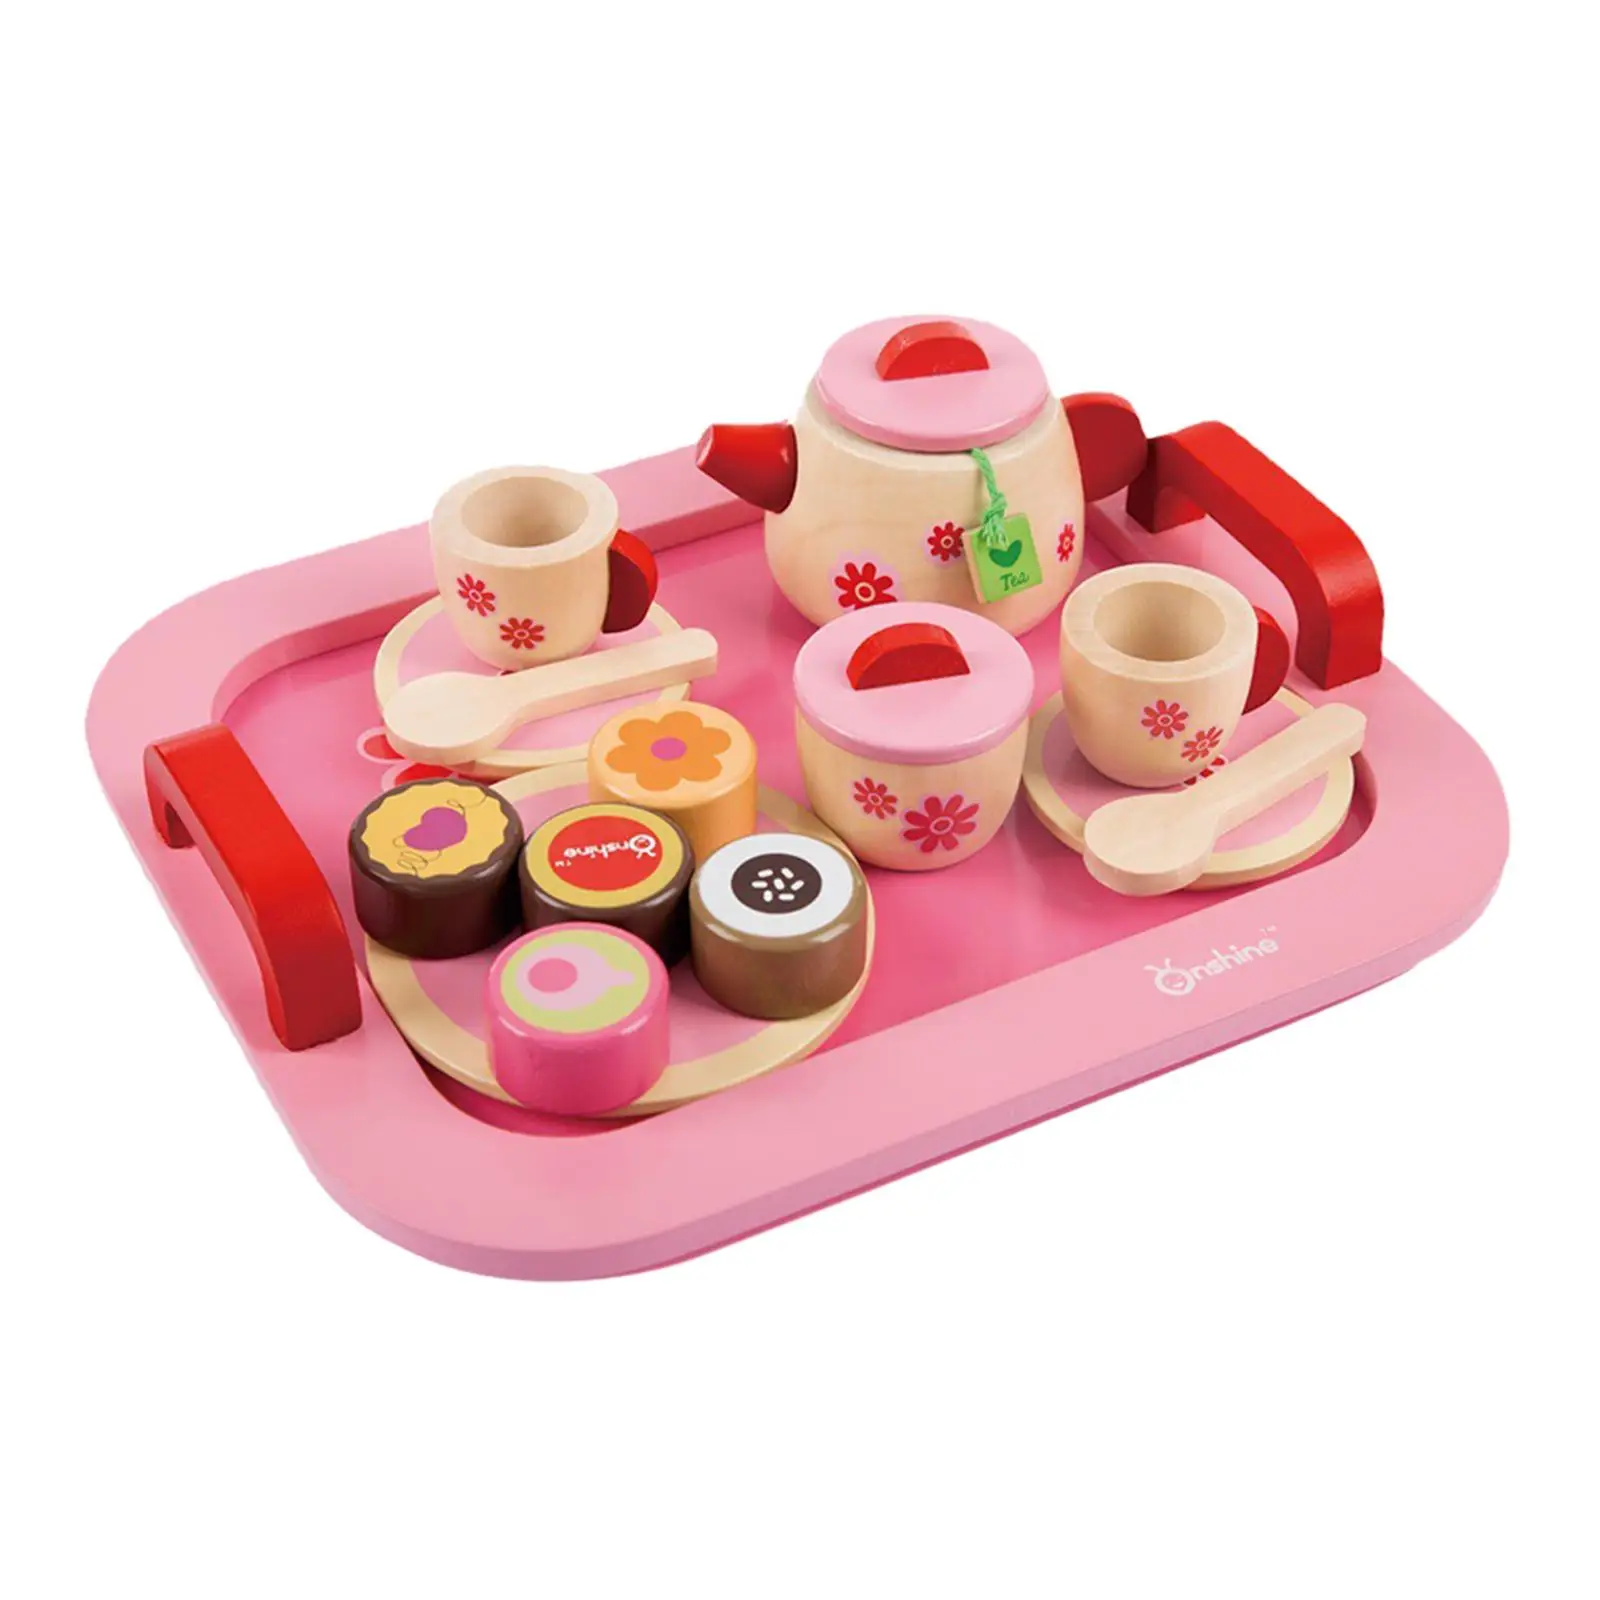 Wooden Pretend Play Tea Party Set Simulation Teacup Toy for Little Girls